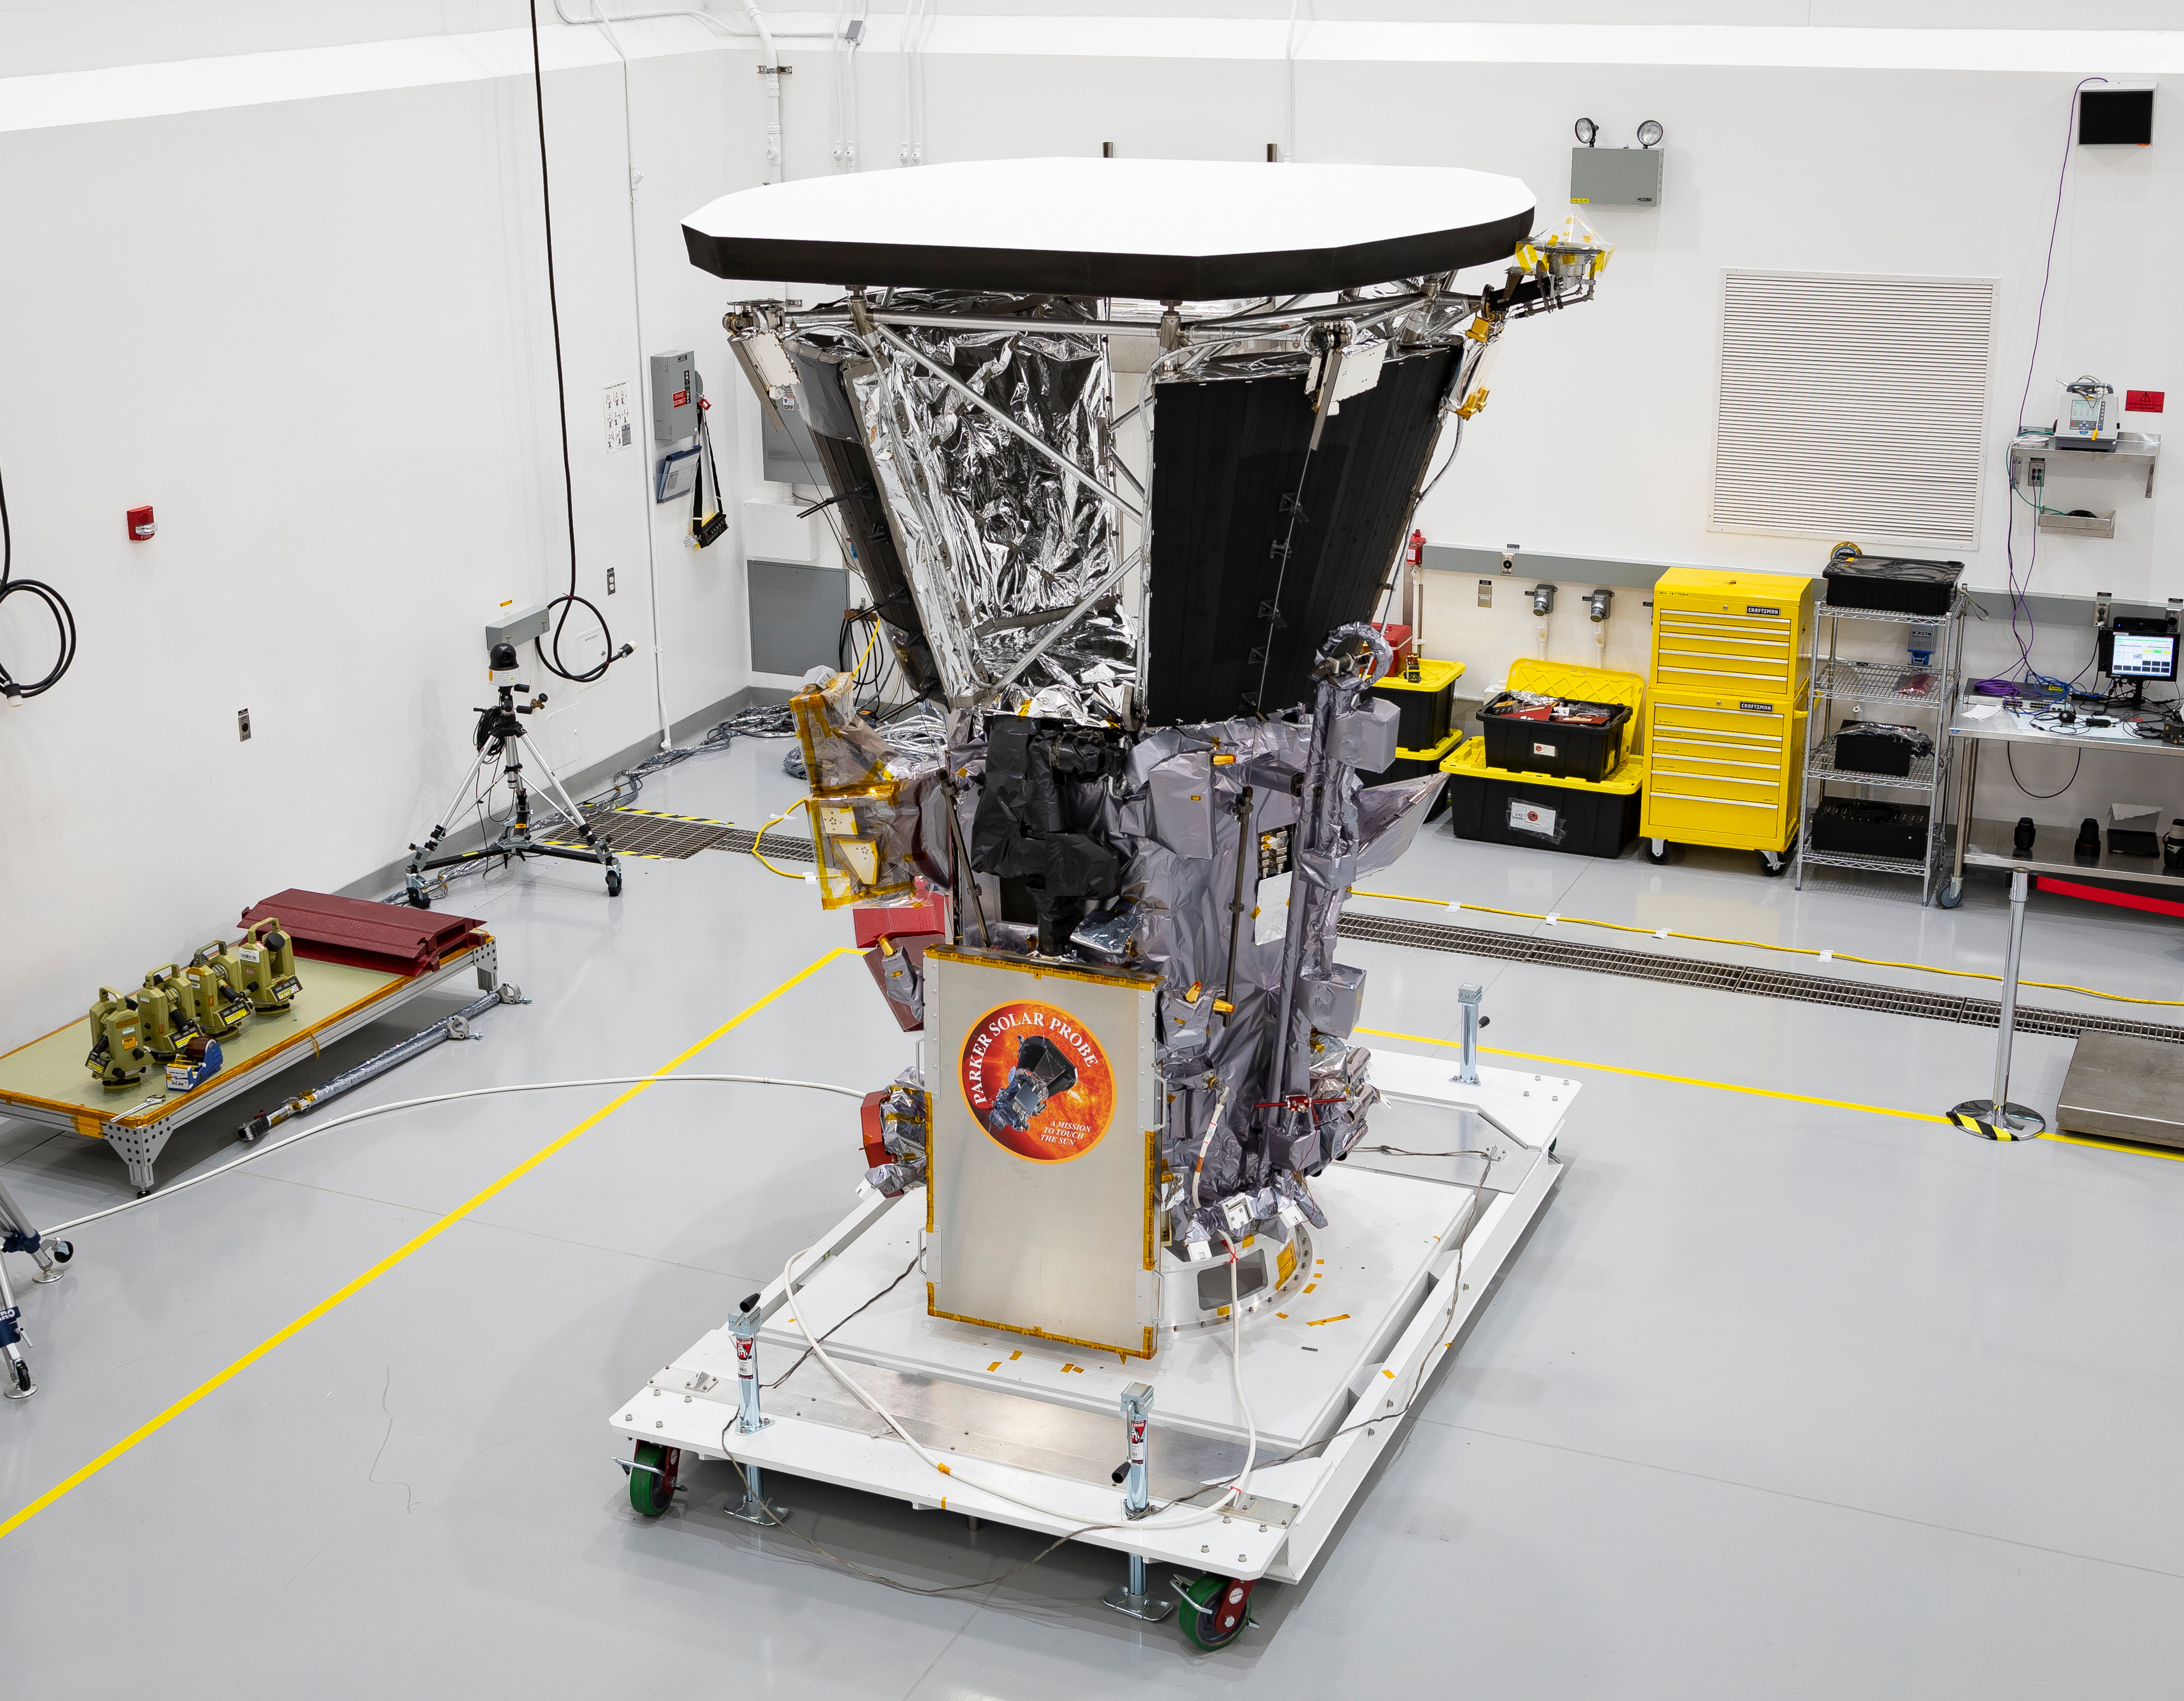 The final design: The actual Parker Solar Probe spacecraft shown during launch preparations in a cleanroom at Astrotech Space Operations in Titusville, Florida, in July 2018.